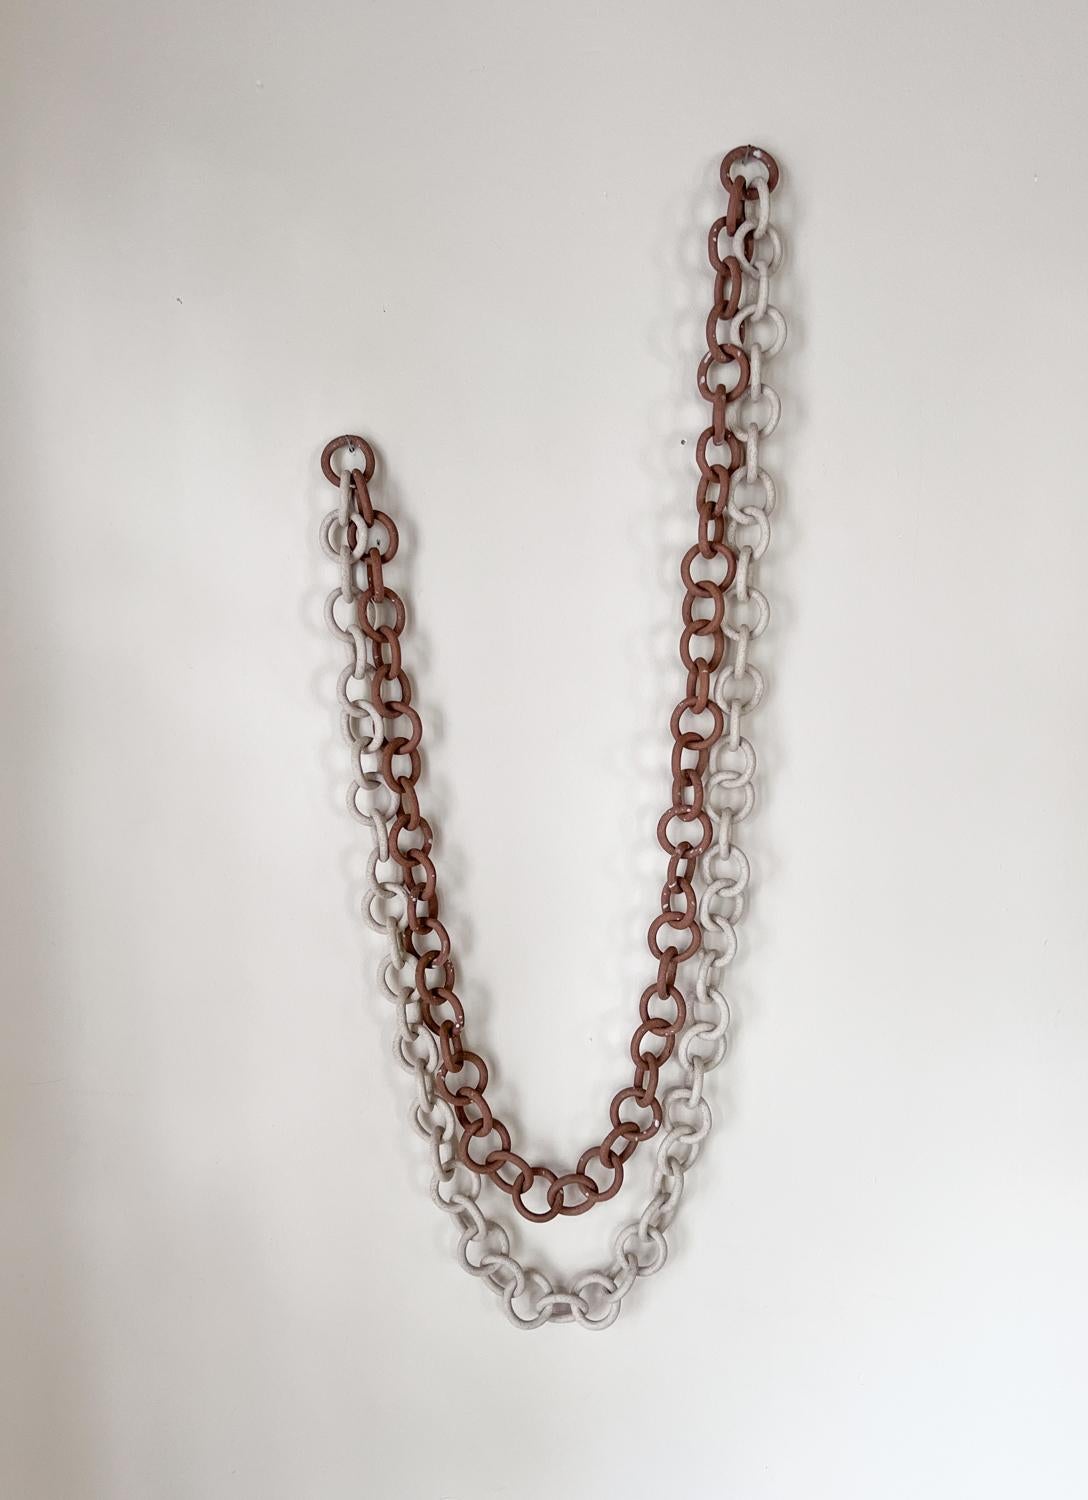 Hand-Crafted Ceramic Link Chain Sculpture and Wall Hanging